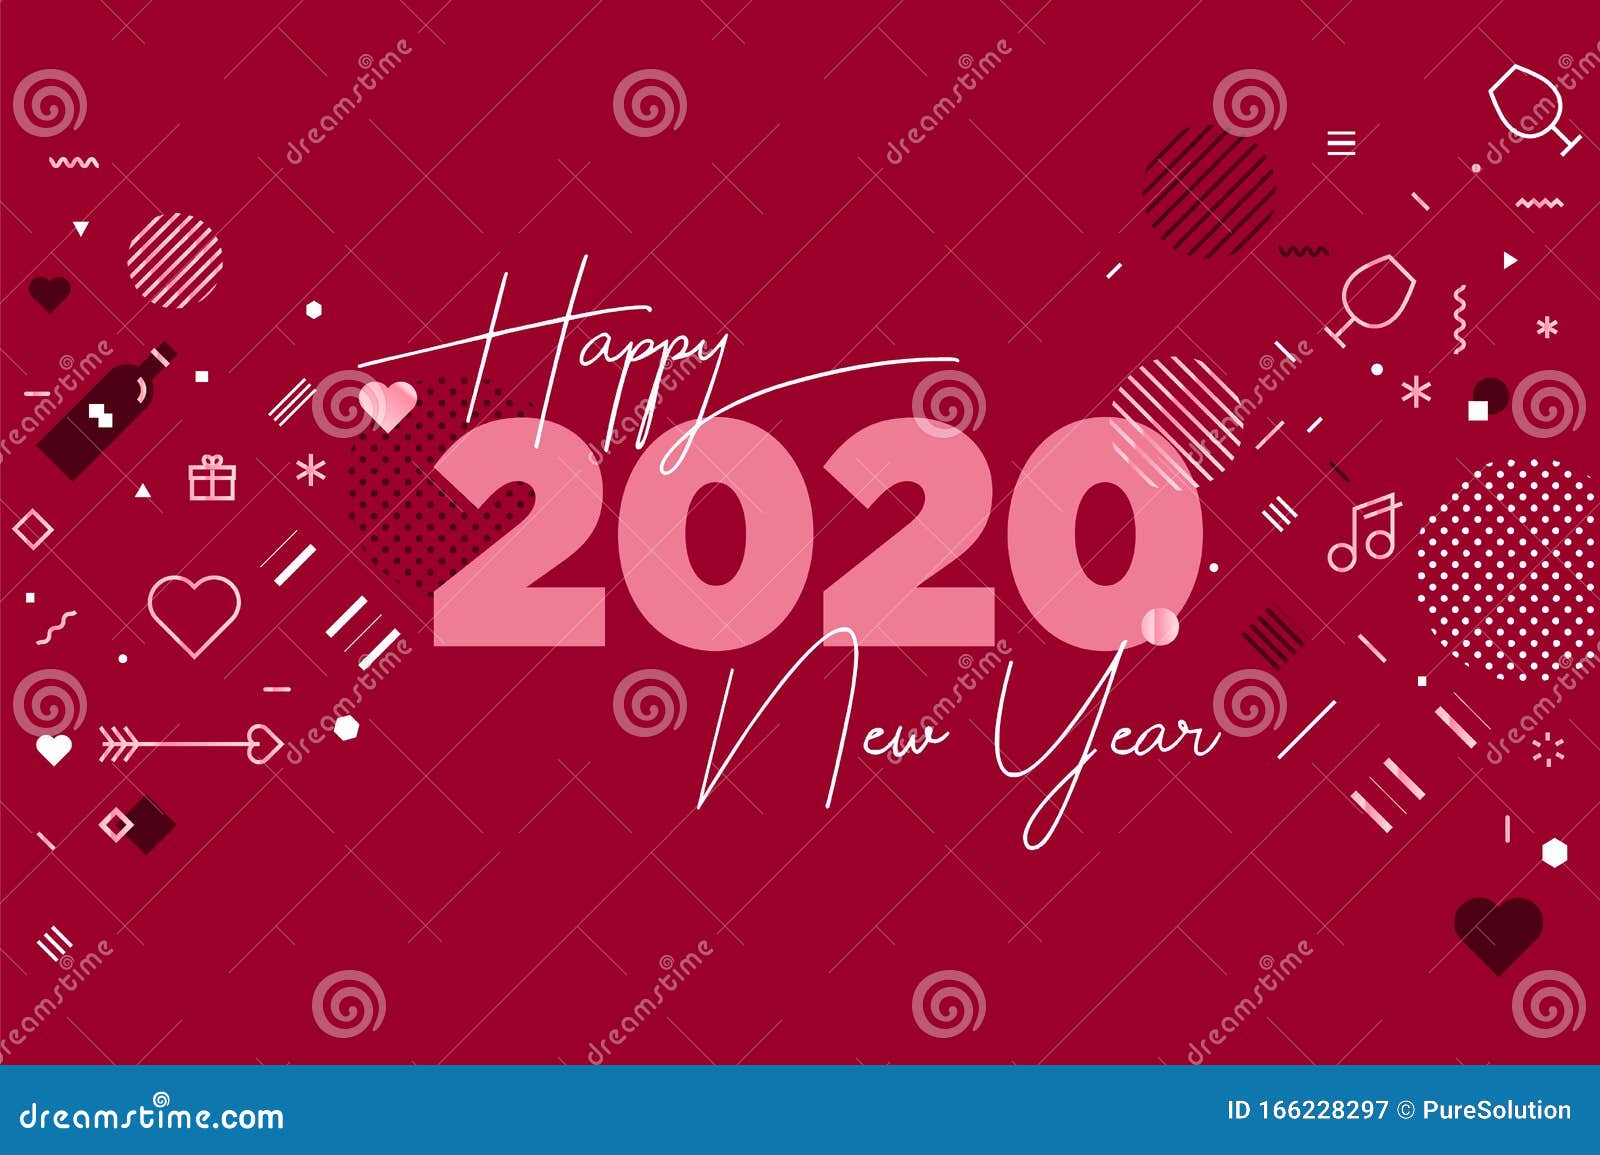 Happy New Year 2020 and Lots of Love Stock Vector - Illustration ...